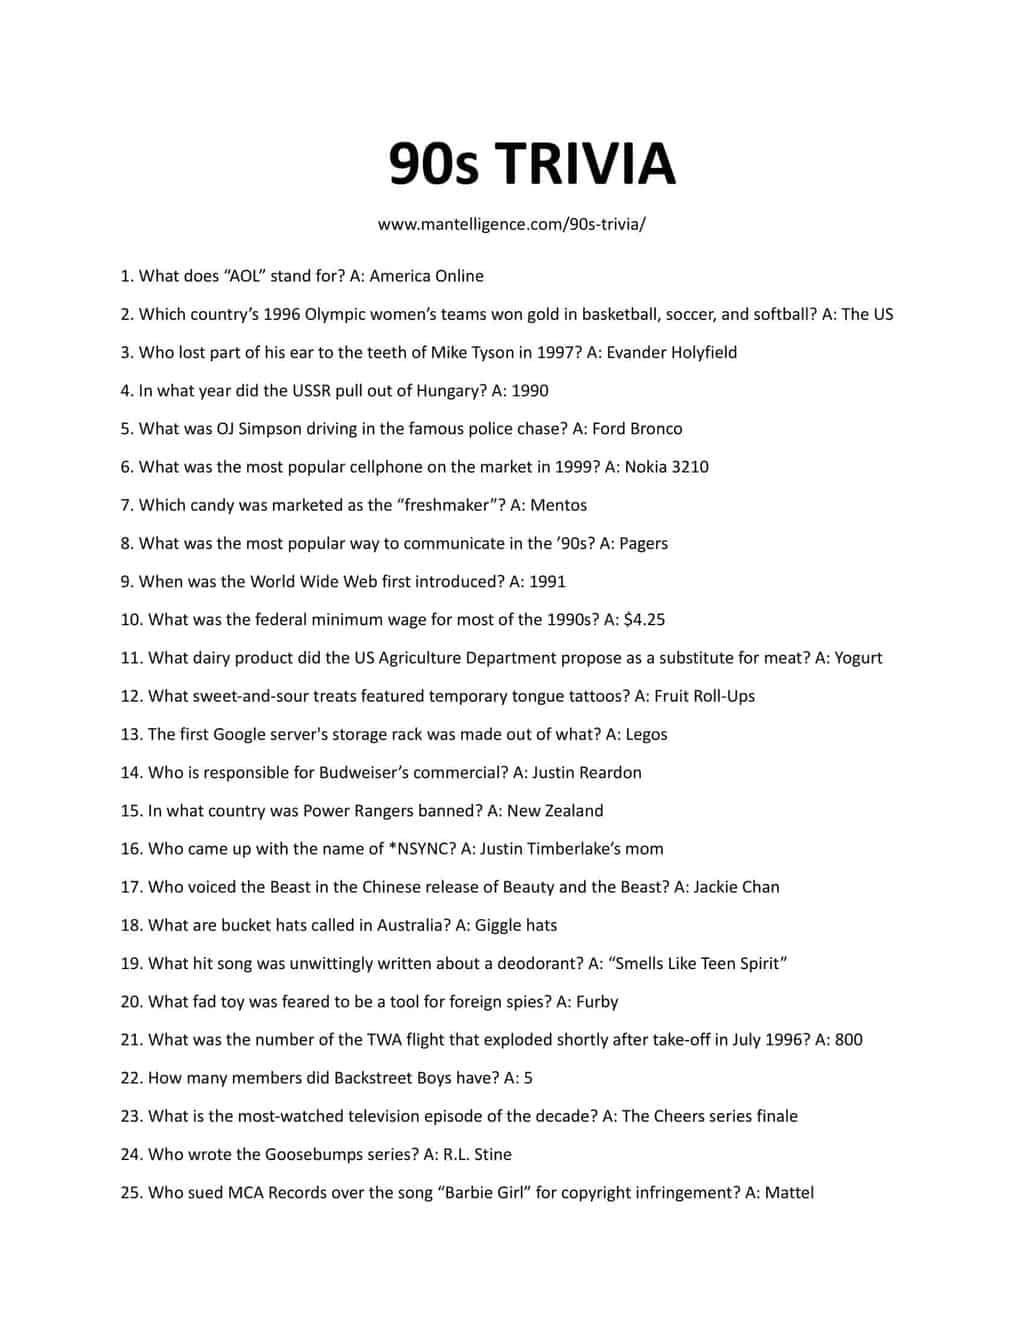 90s Trivia Questions And Answers